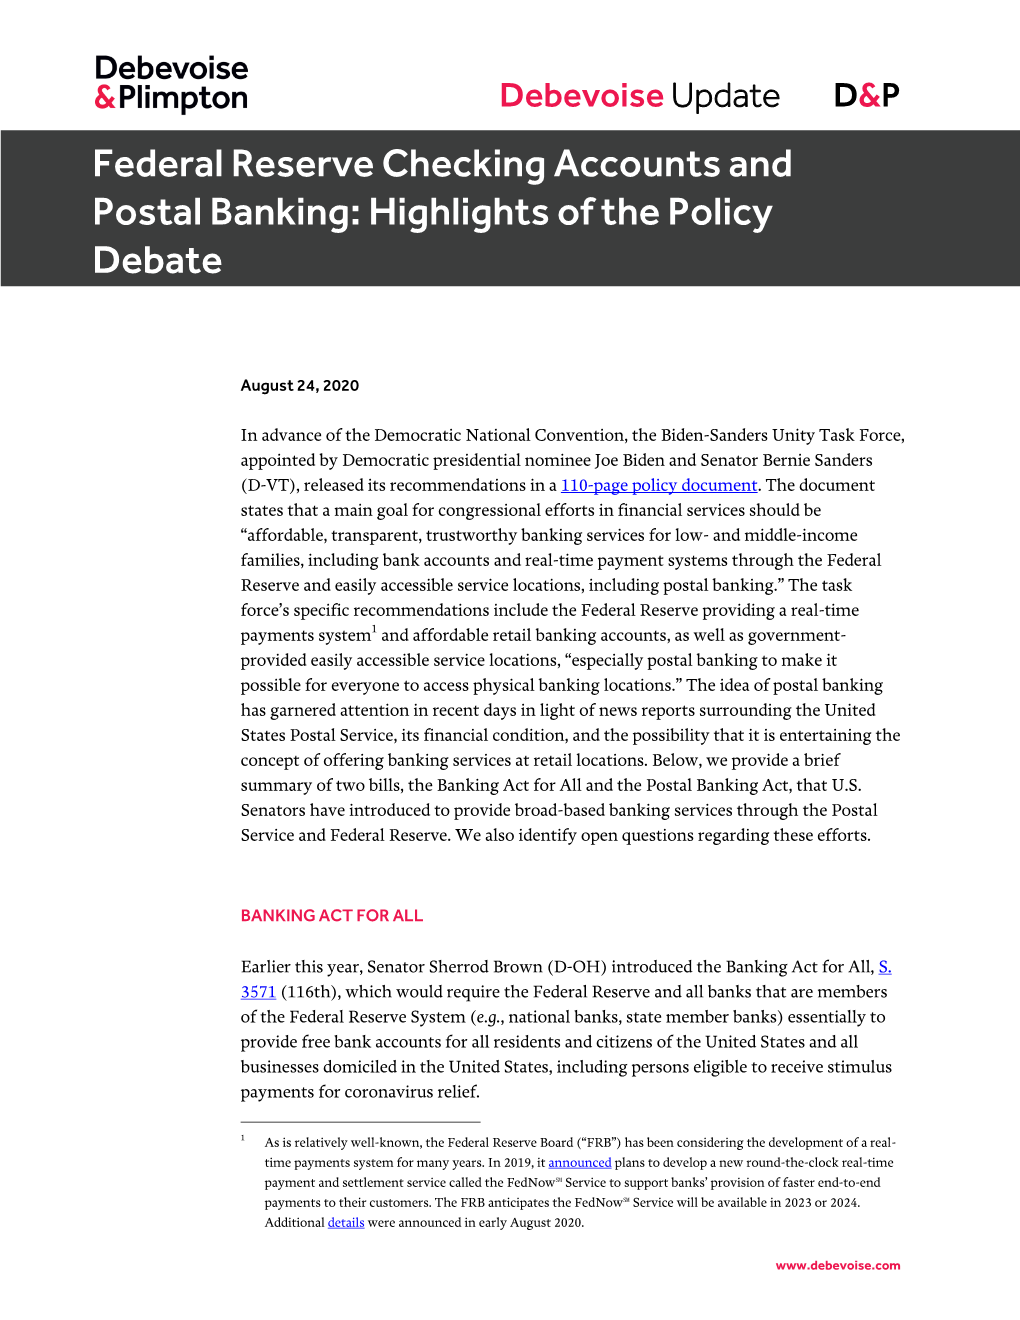 Federal Reserve Checking Accounts and Postal Banking: Highlights of the Policy Debate